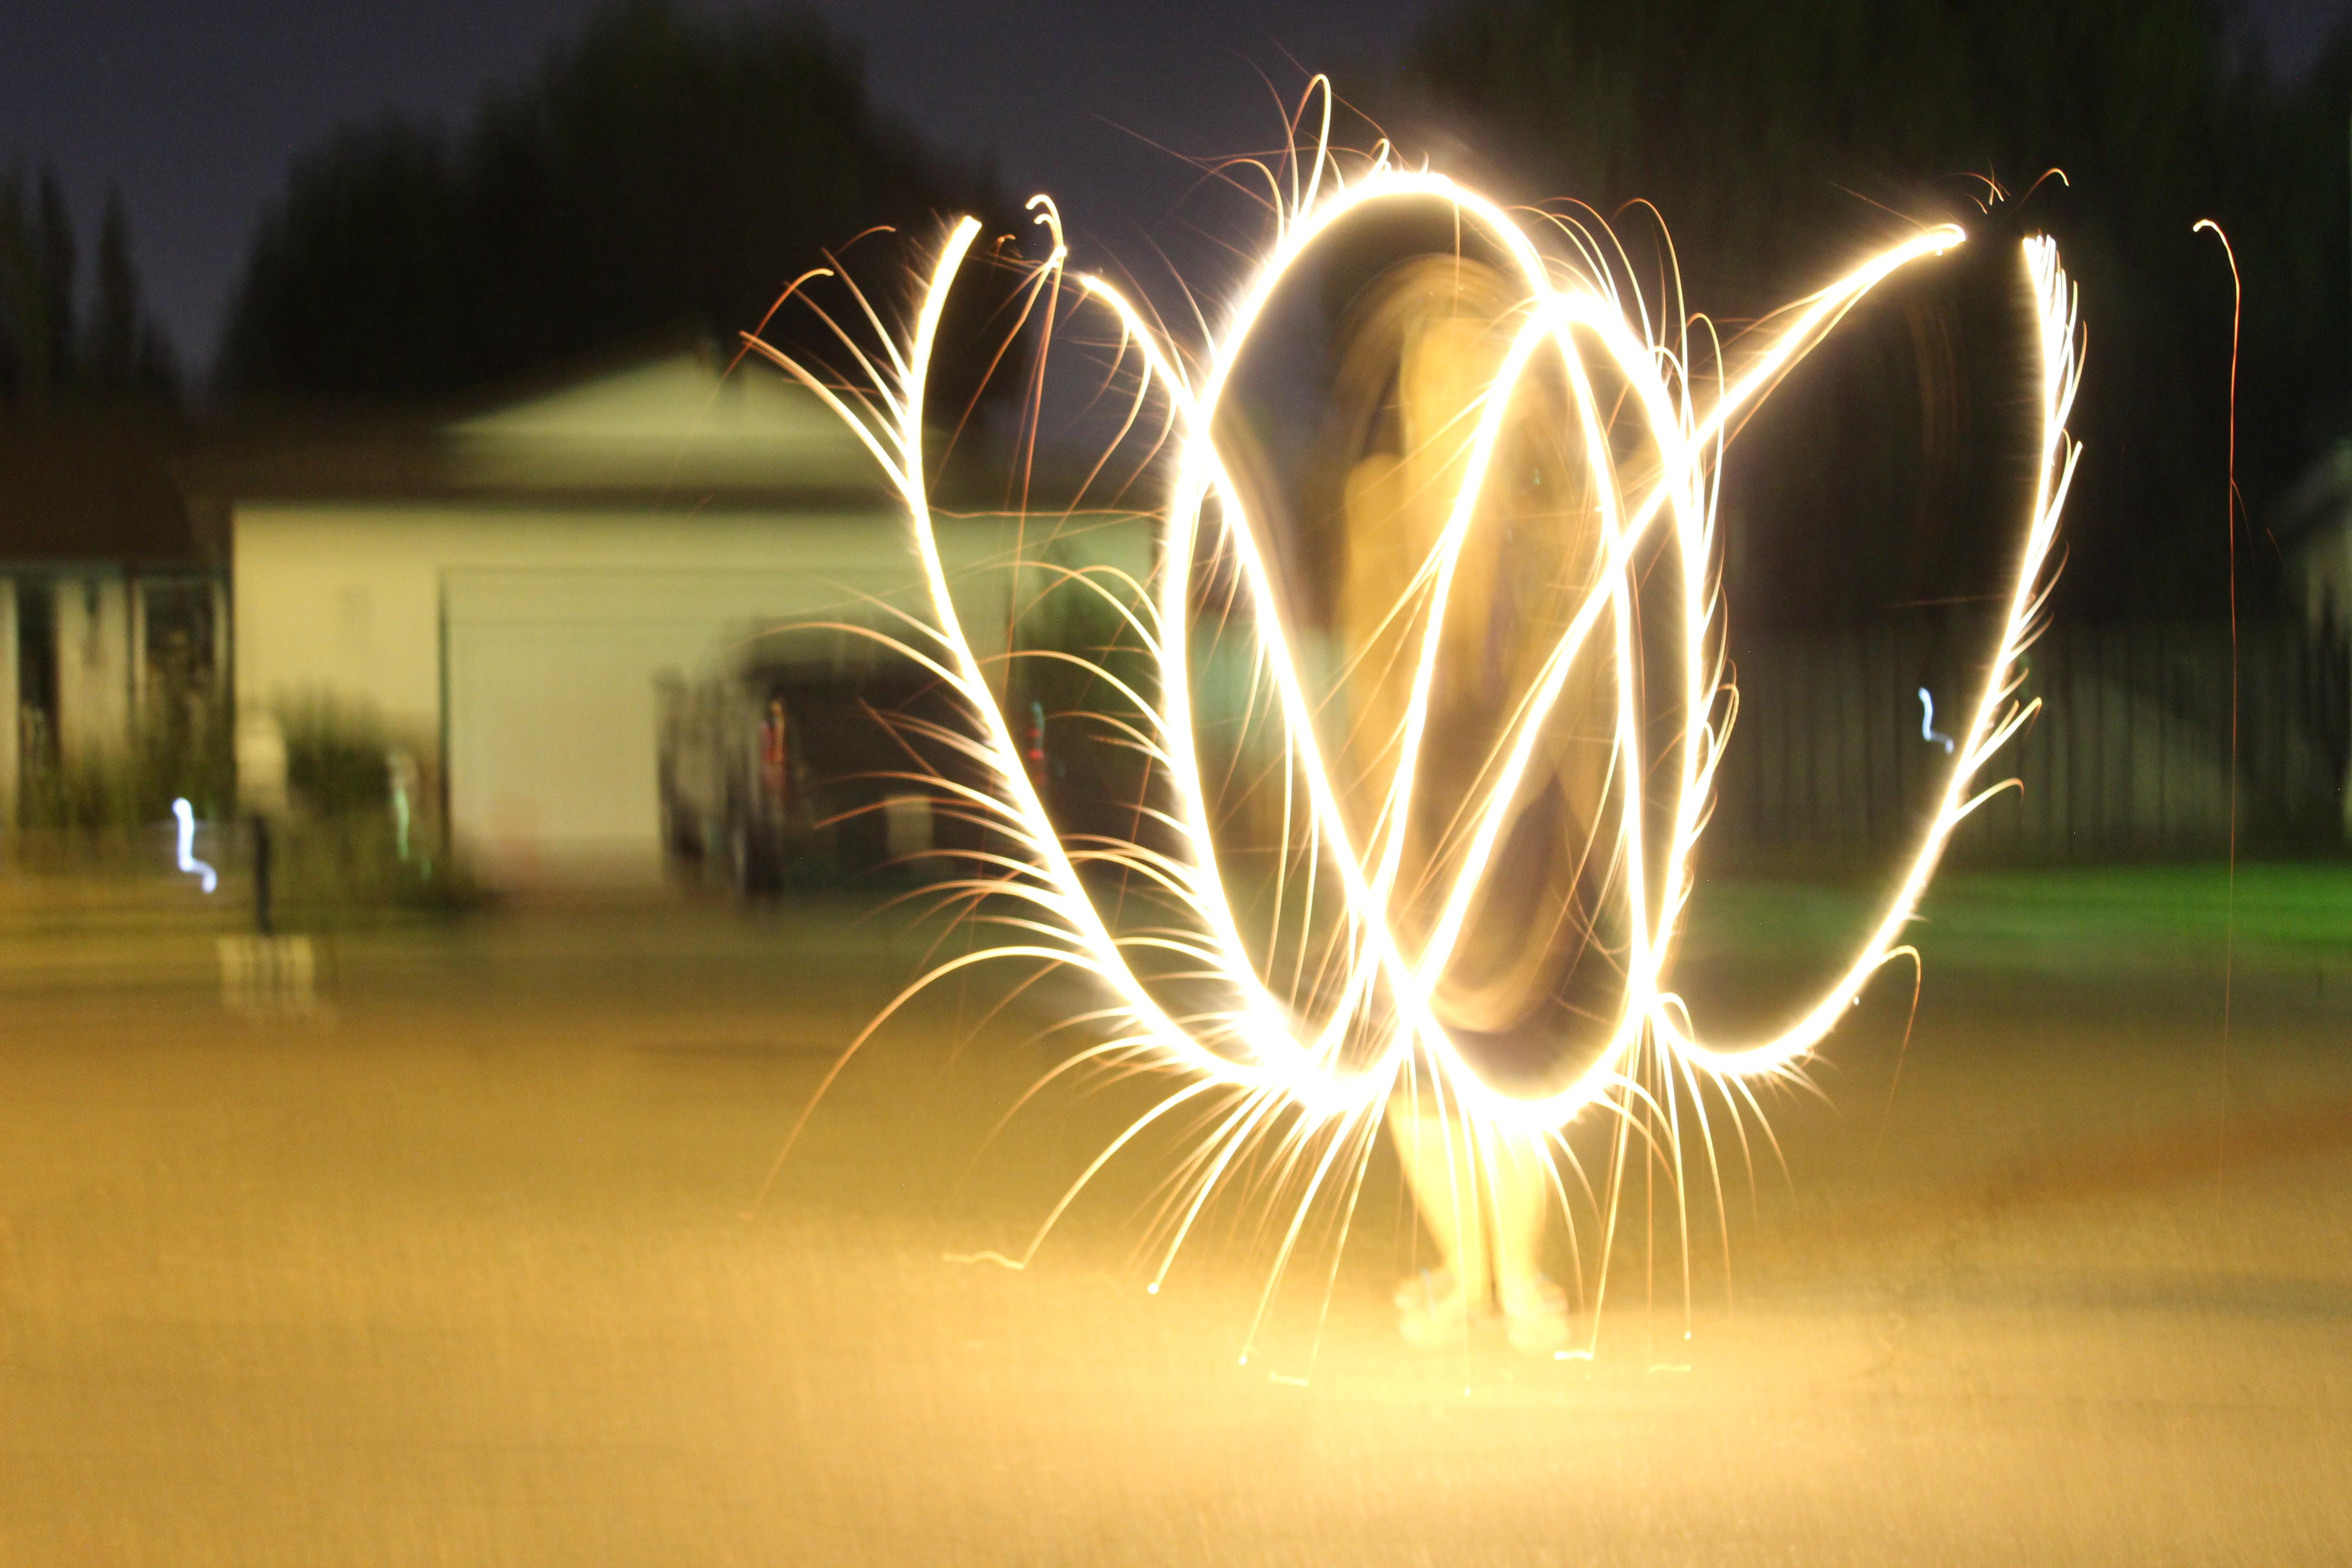 Try not to be too jealous of my mad sparkler skills ;-)